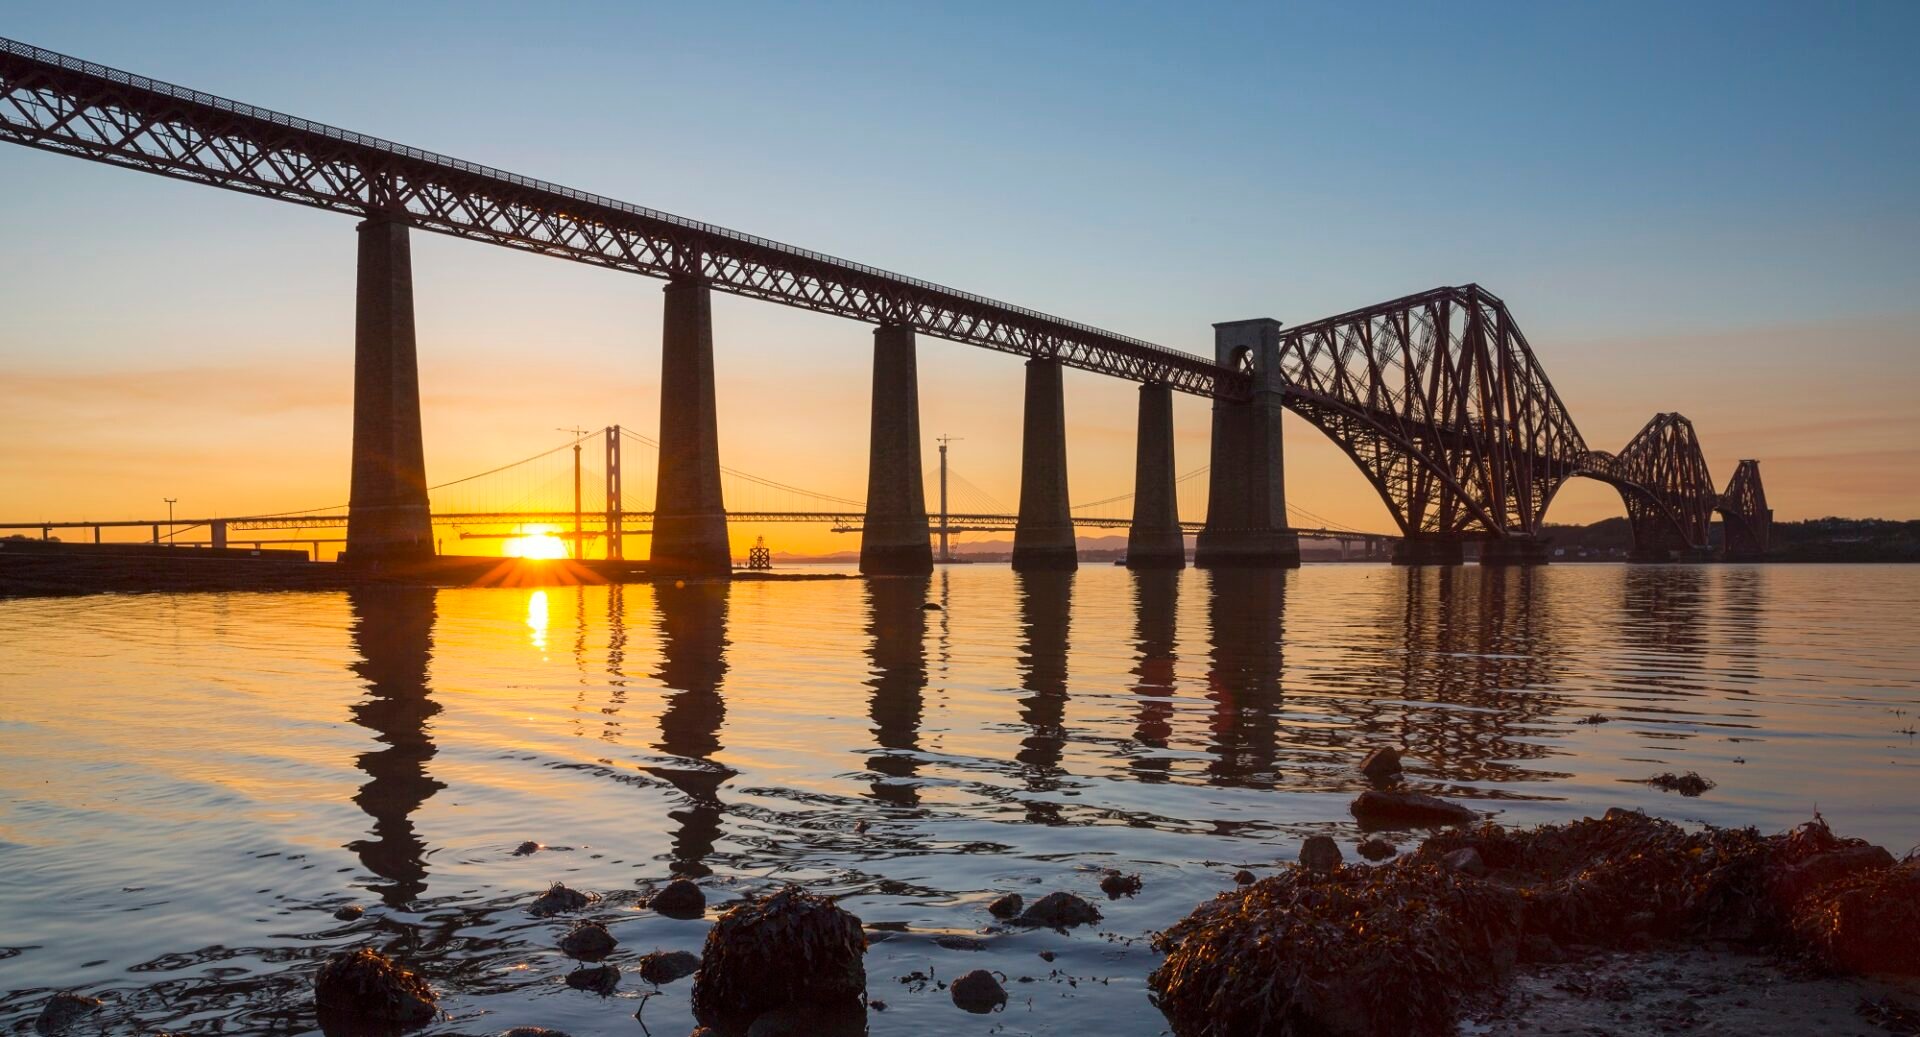 Forth Bridge at sunset, South Queensferry